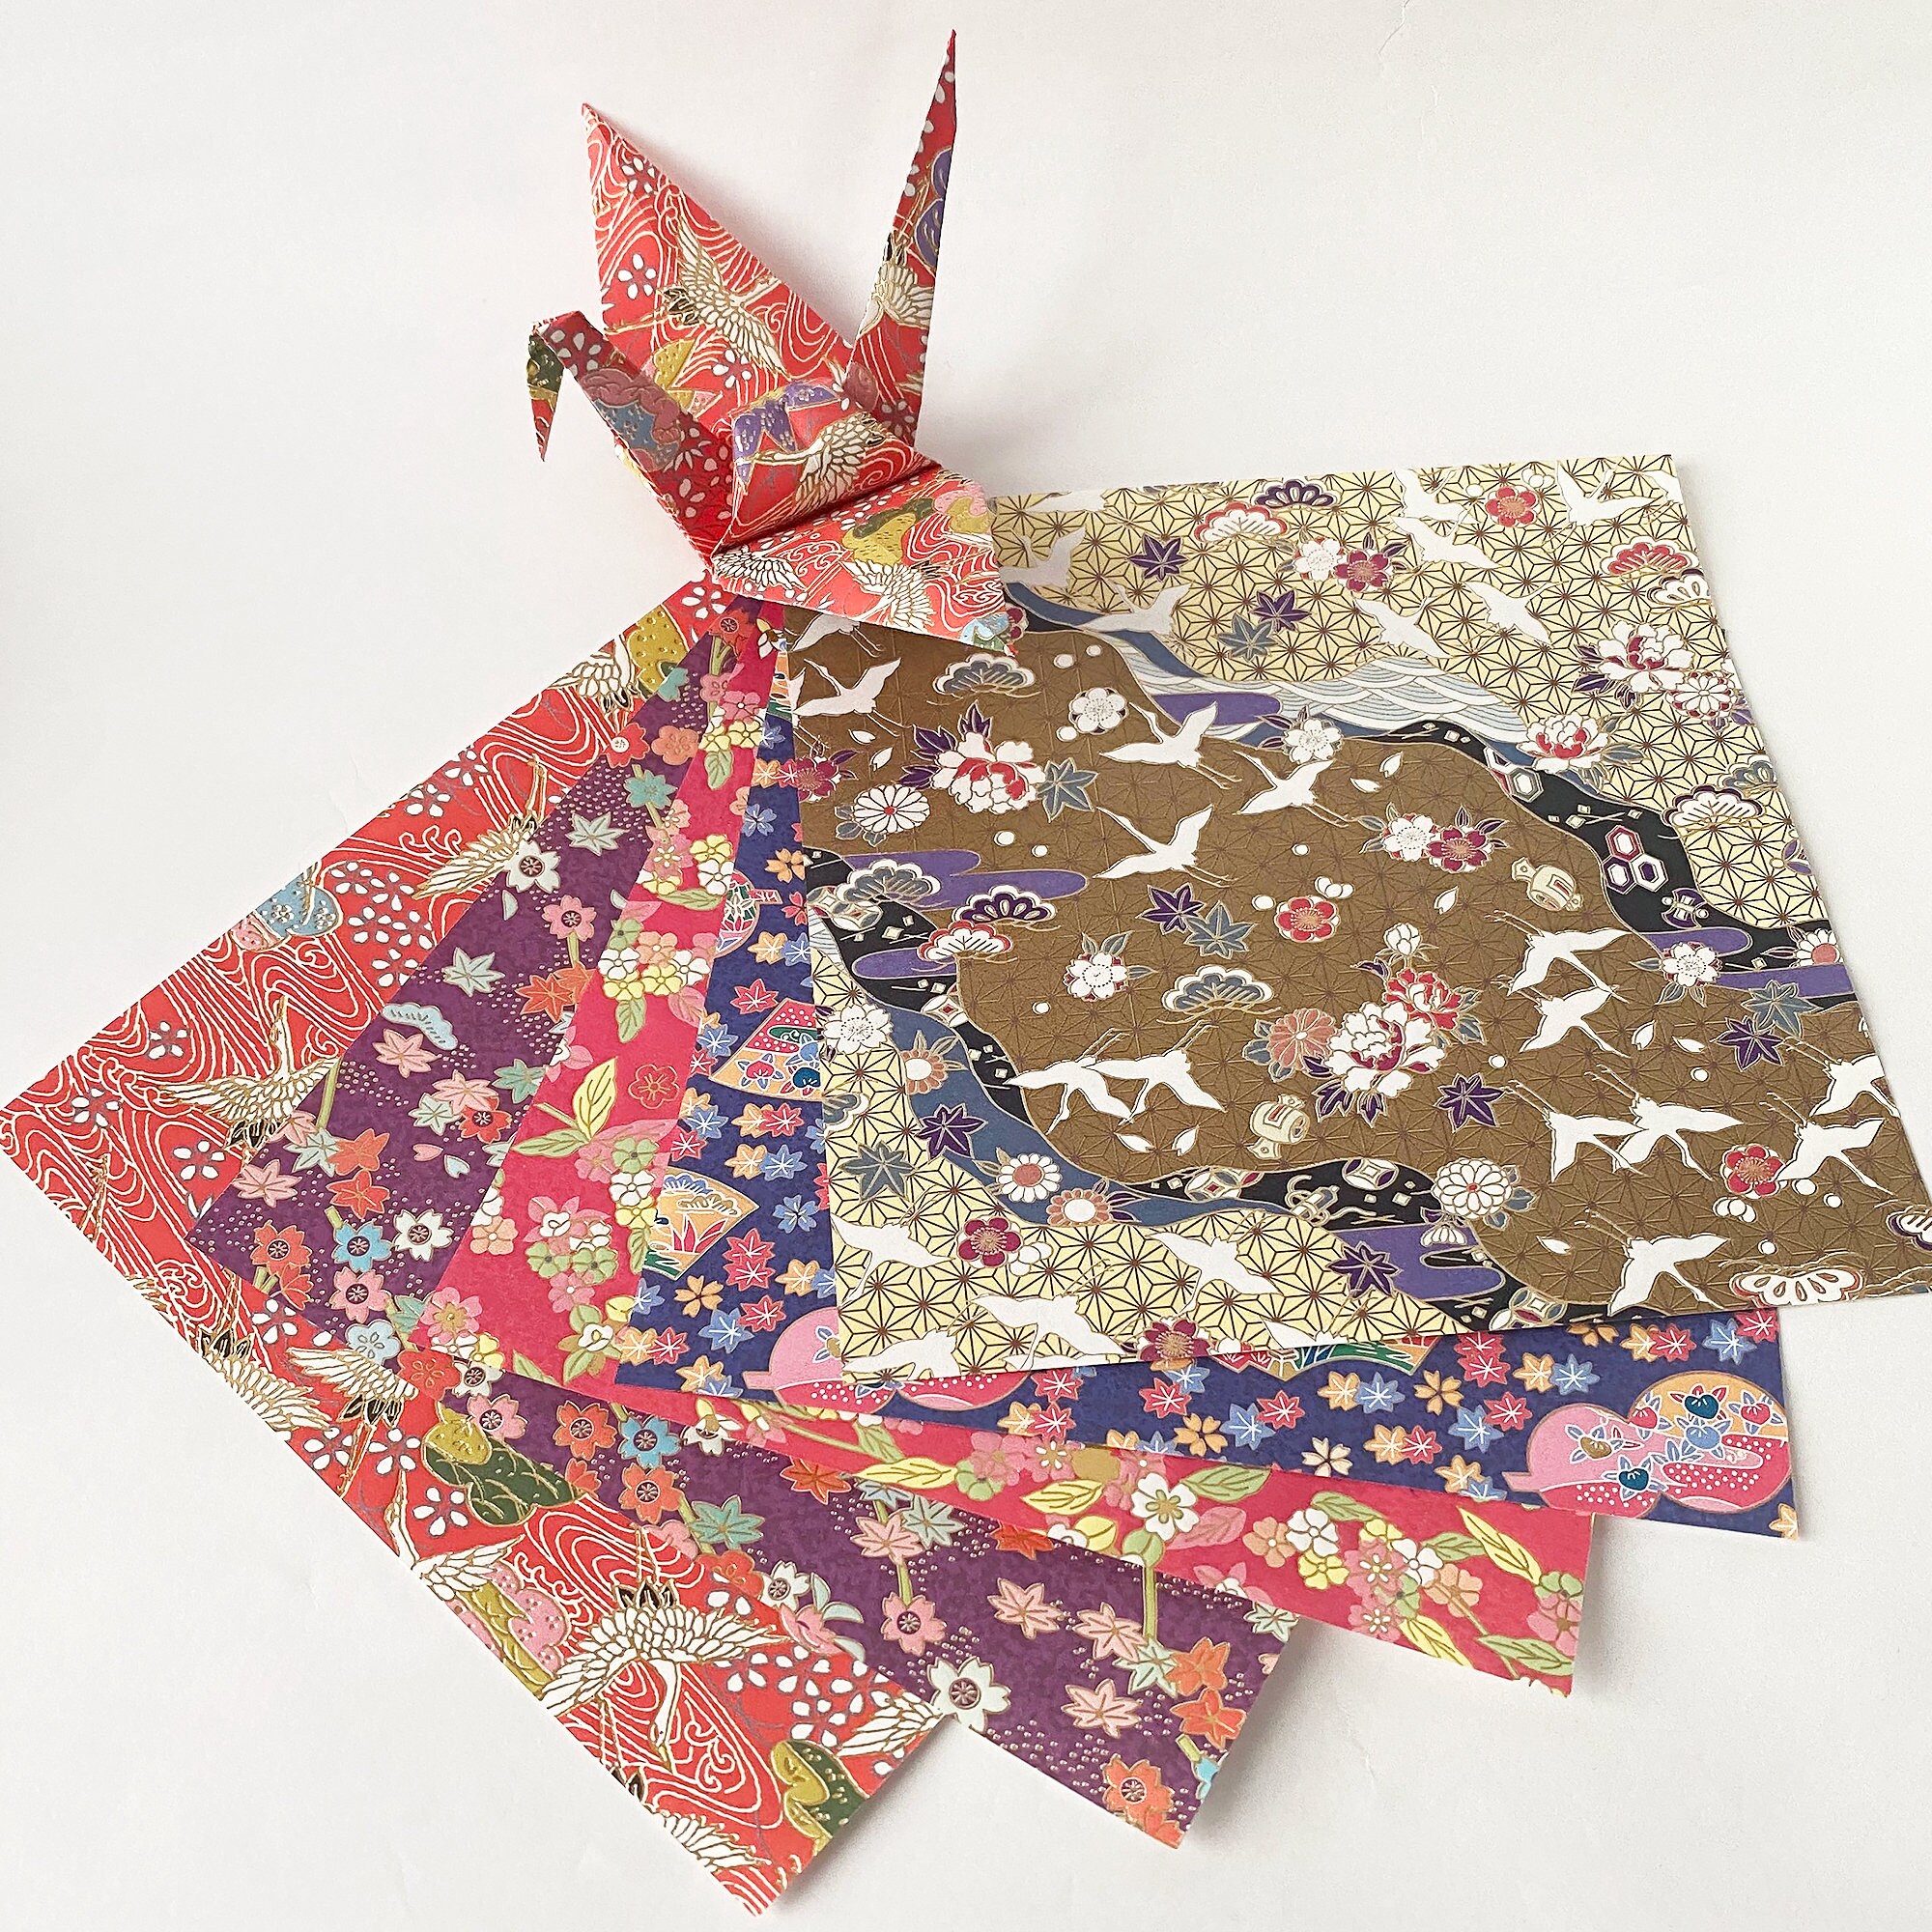 Japanese Cranes, Assorted Origami Paper Pack, Japanese Paper, Origami Paper  Sheets, Craft Folding DIY Project, Gift Idea, 15x15 cm (6x6)